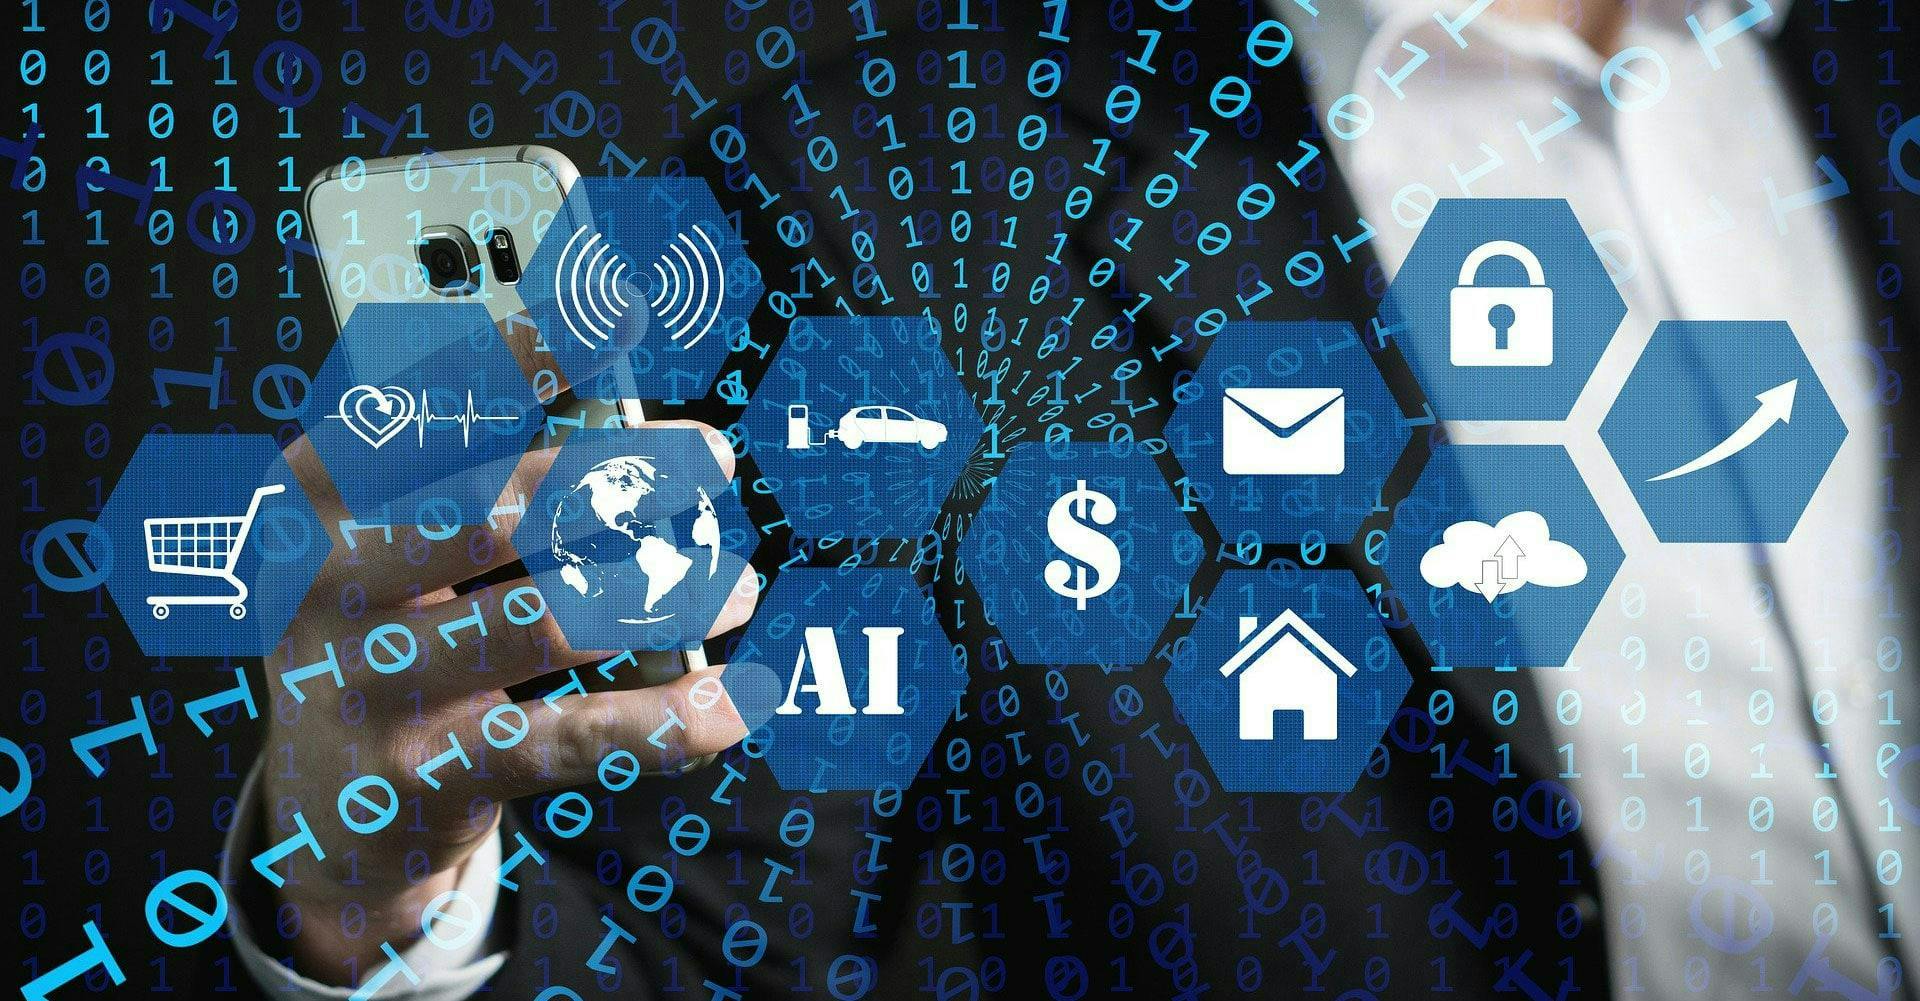 A person holding a smartphone, surrounded by floating hexagonal icons representing various digital and technological concepts such as AI, security, finance, health, and communication, within a binary-coded digital backdrop.